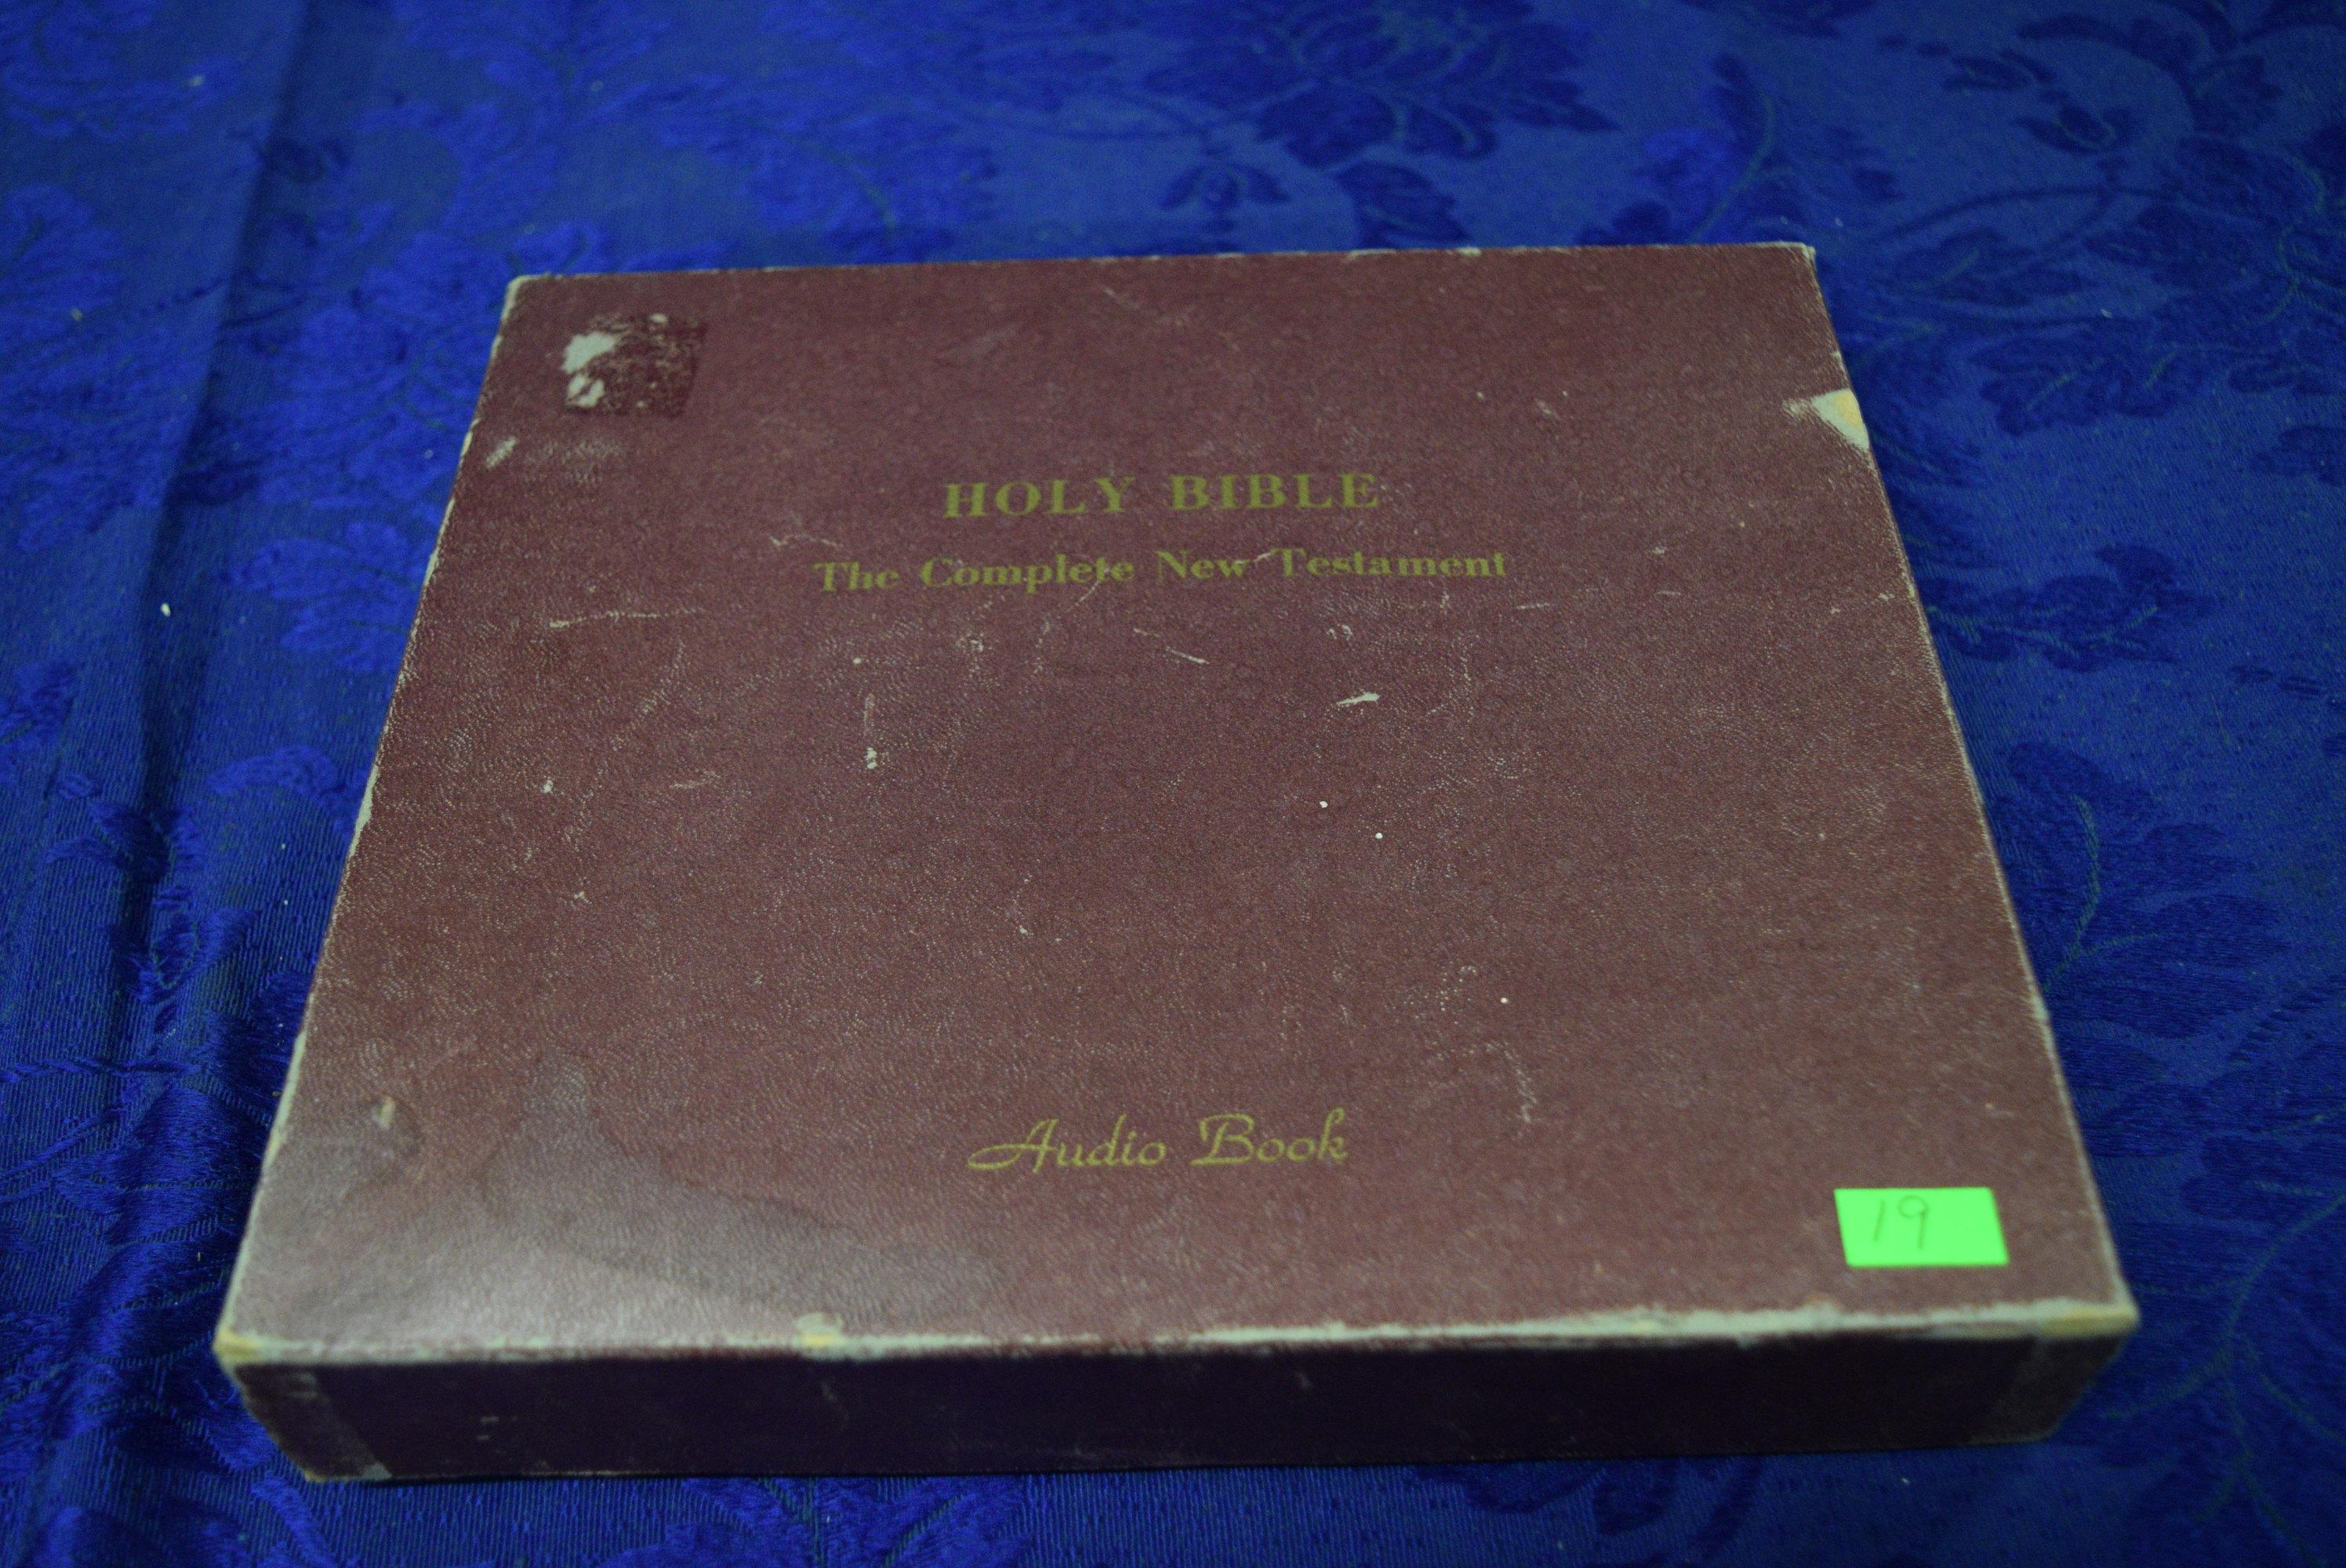 VINTAGE COLLECTION OF THE HOLY BIBLE ON AUDIO!